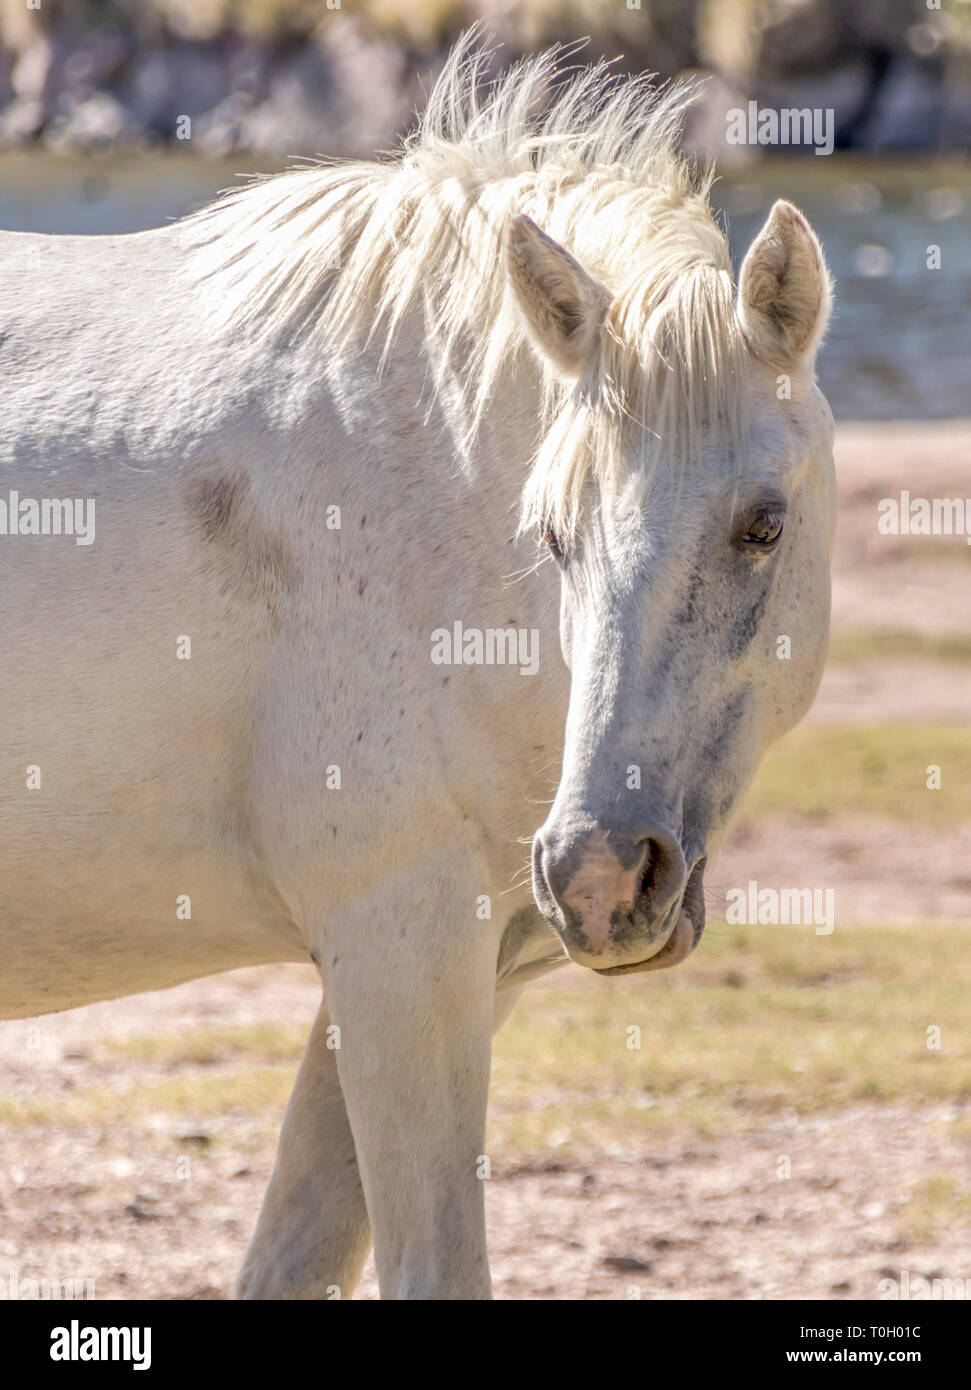 White Horse Mustang Sauvage Banque D'Images